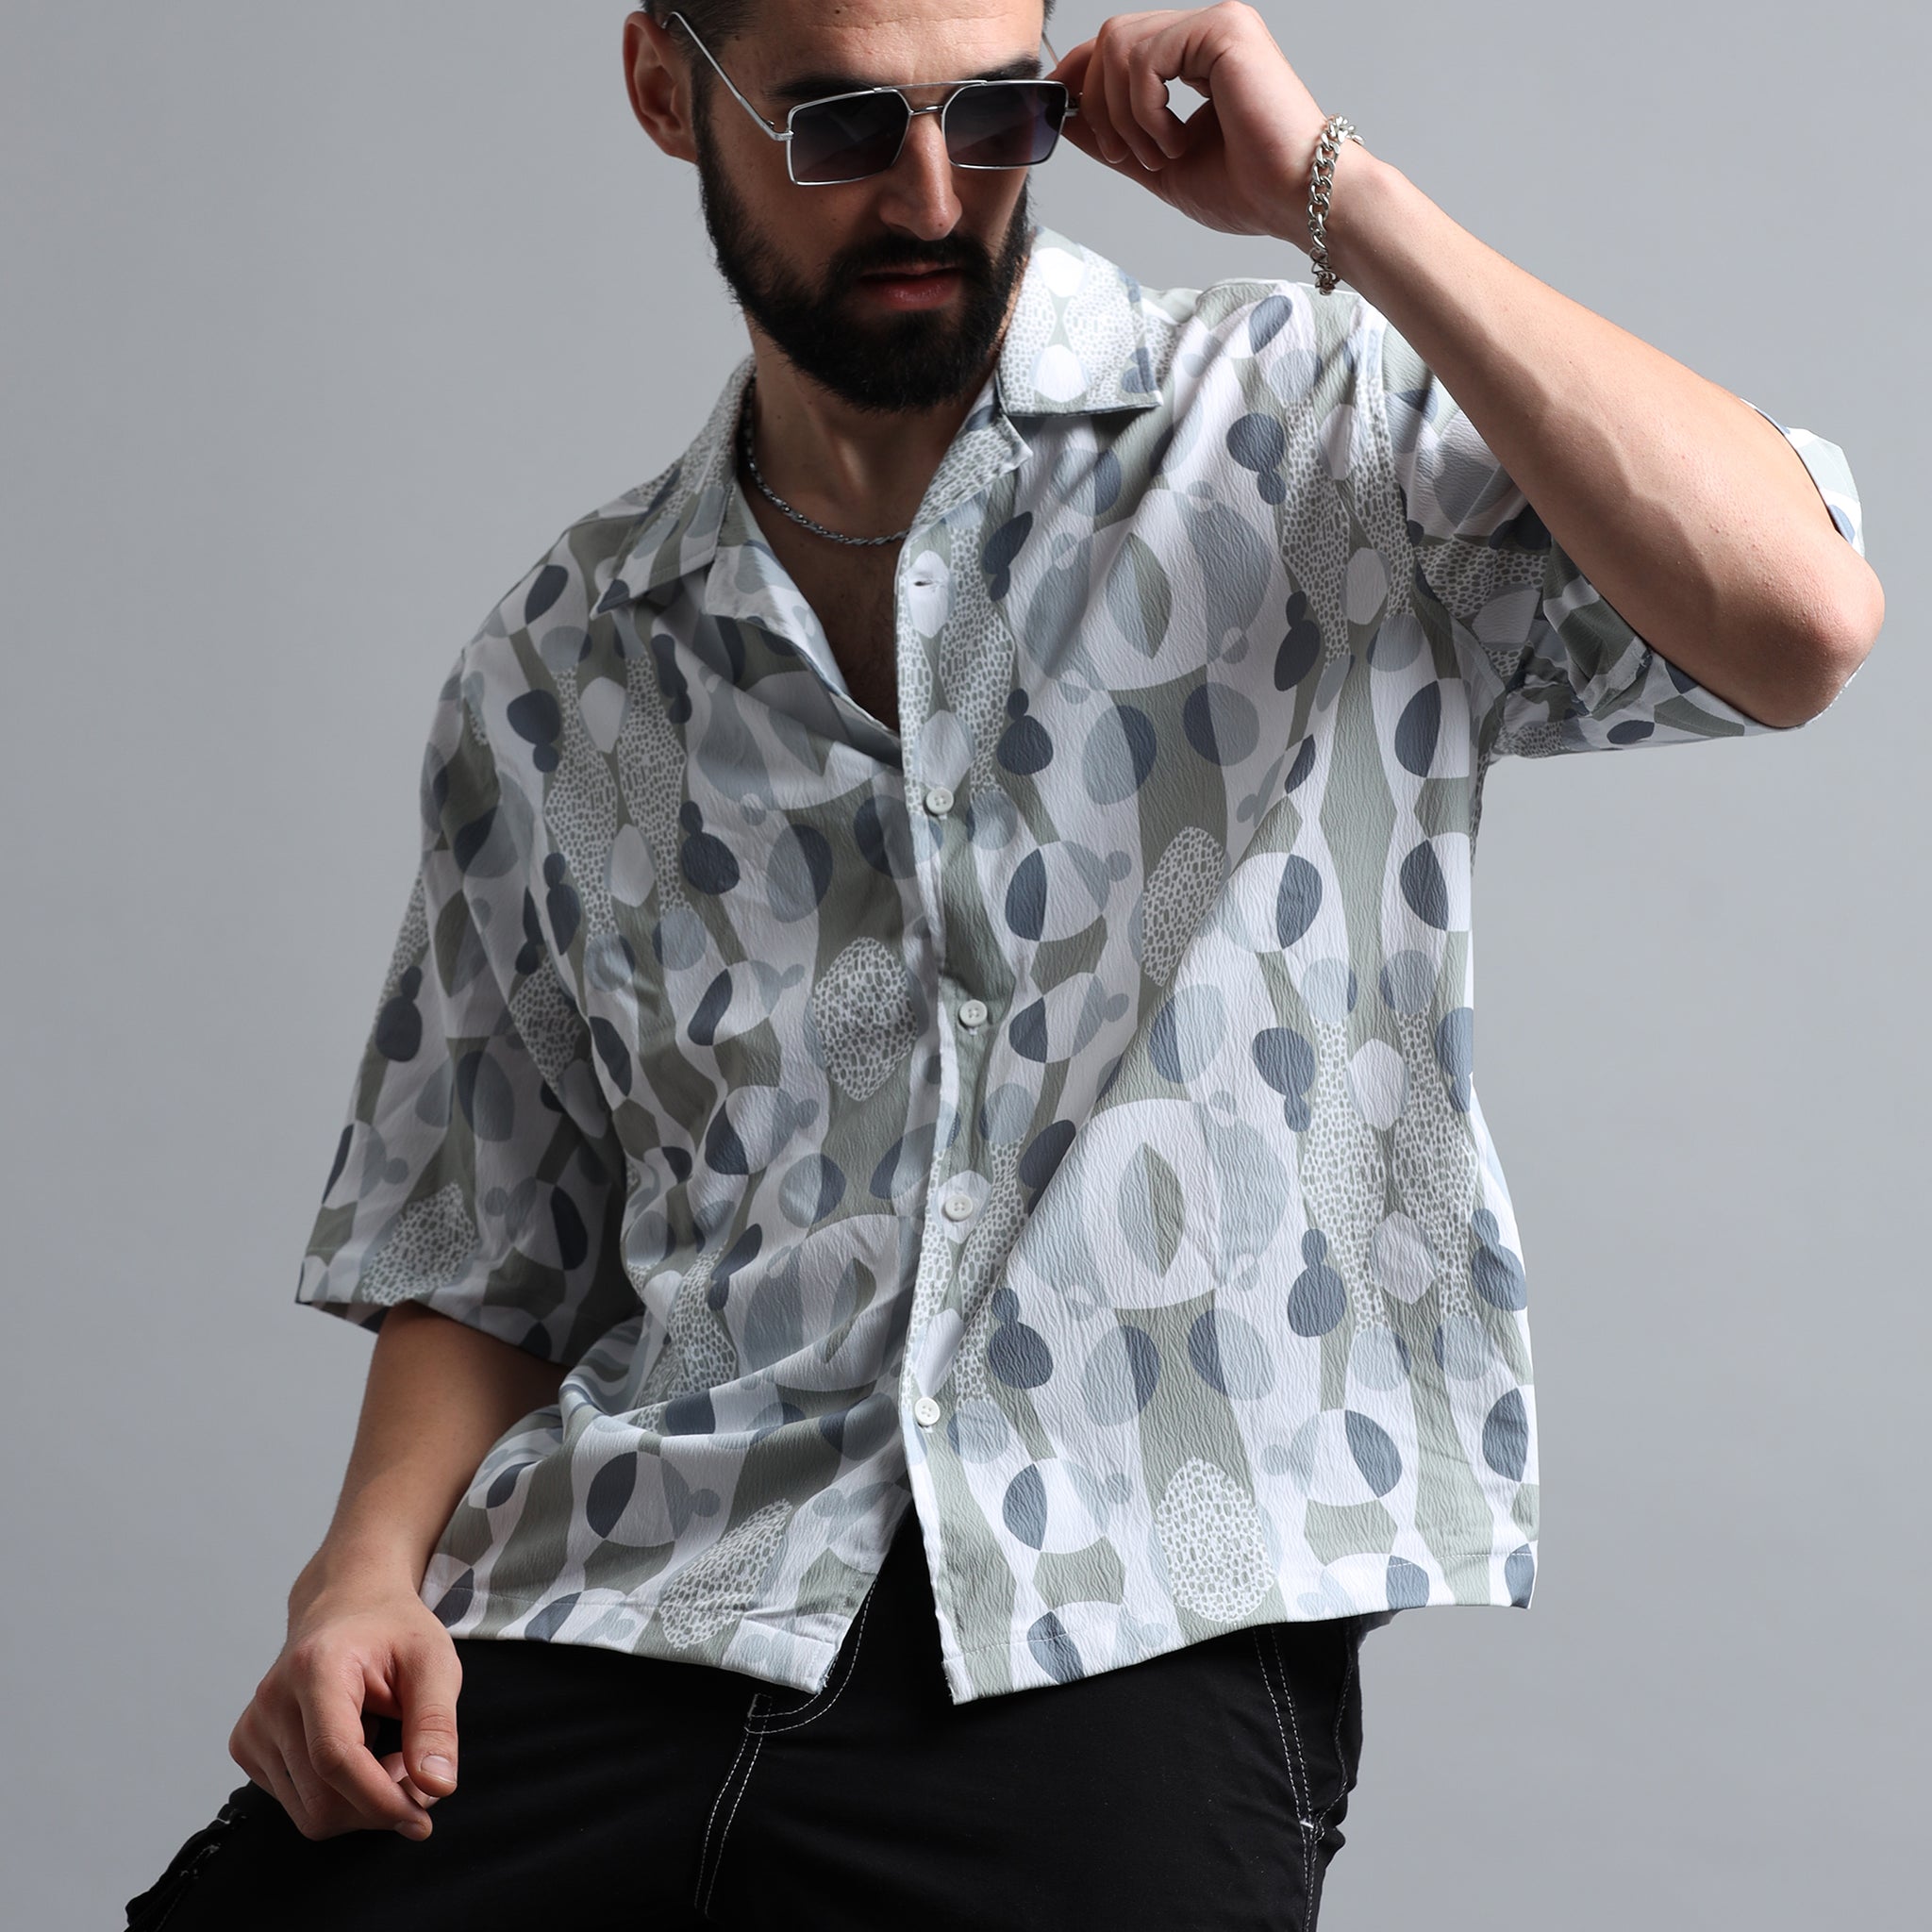 Snowy Elegance: White Printed Shirt Collection